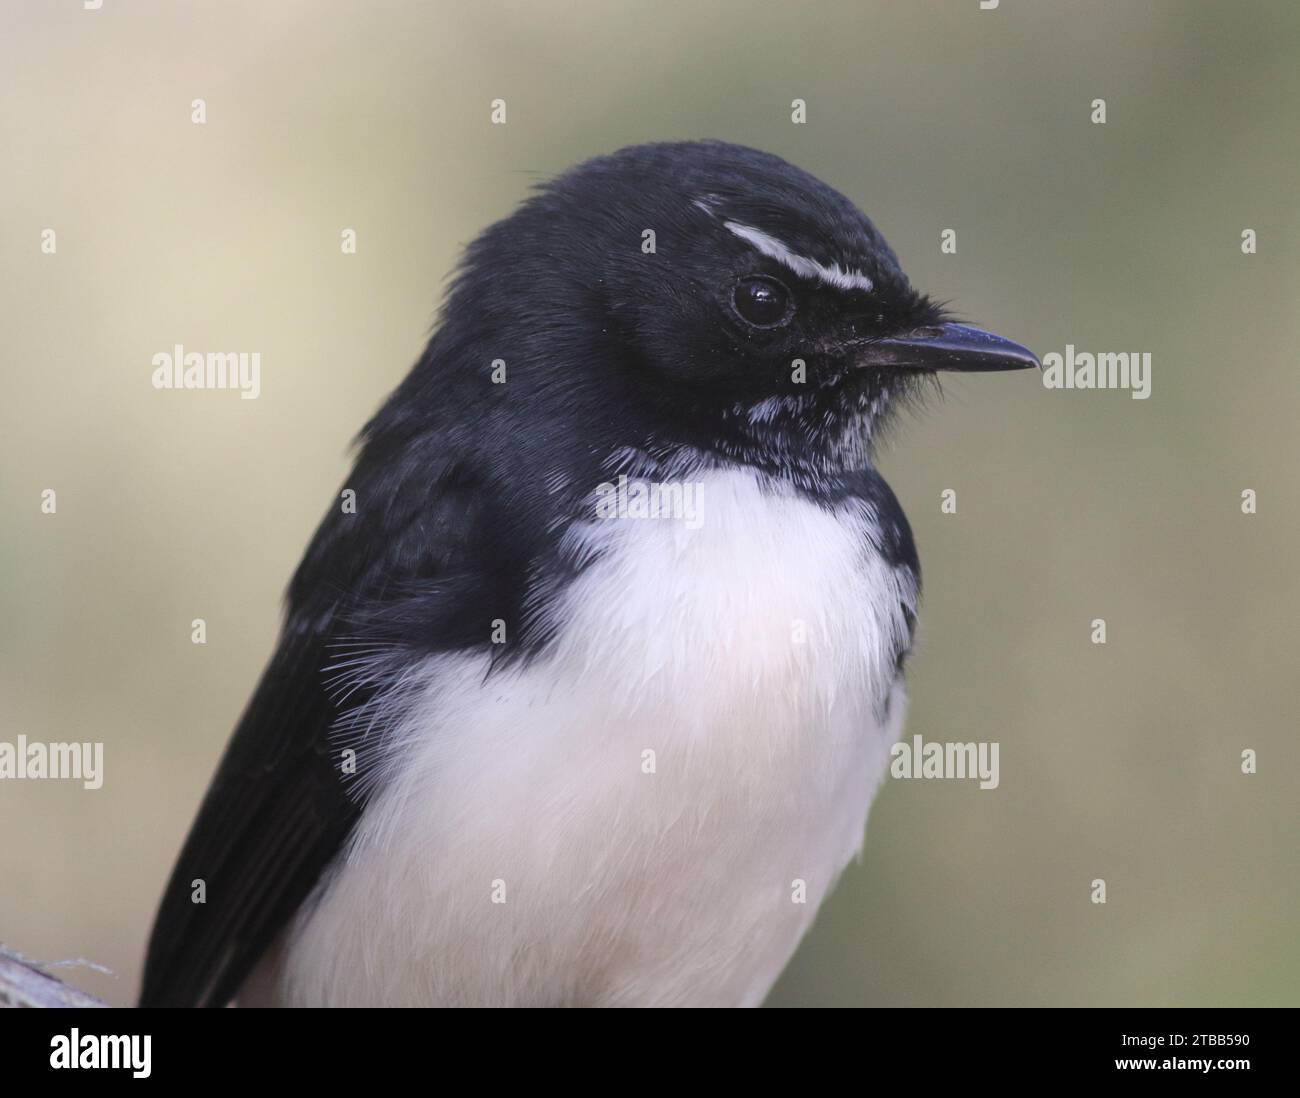 Portrait of a black and white willie wagtail bird in Australia Stock Photo